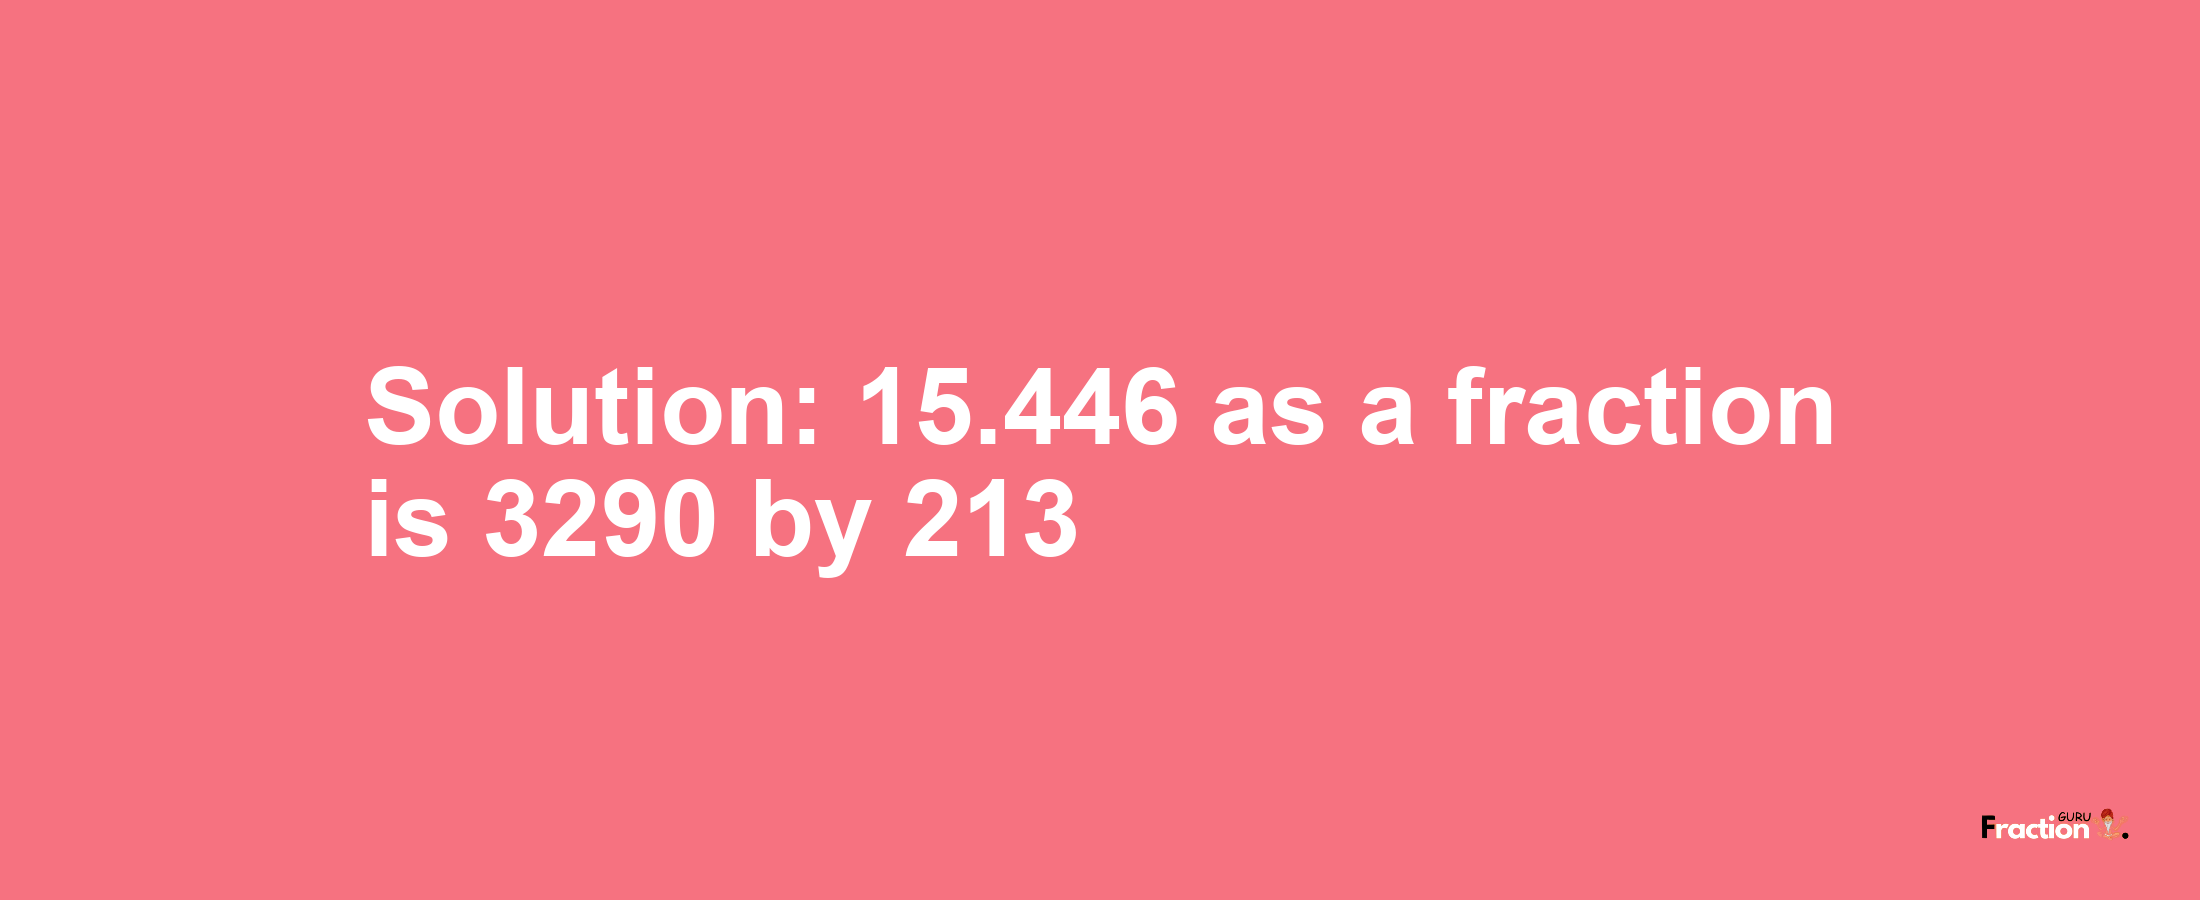 Solution:15.446 as a fraction is 3290/213